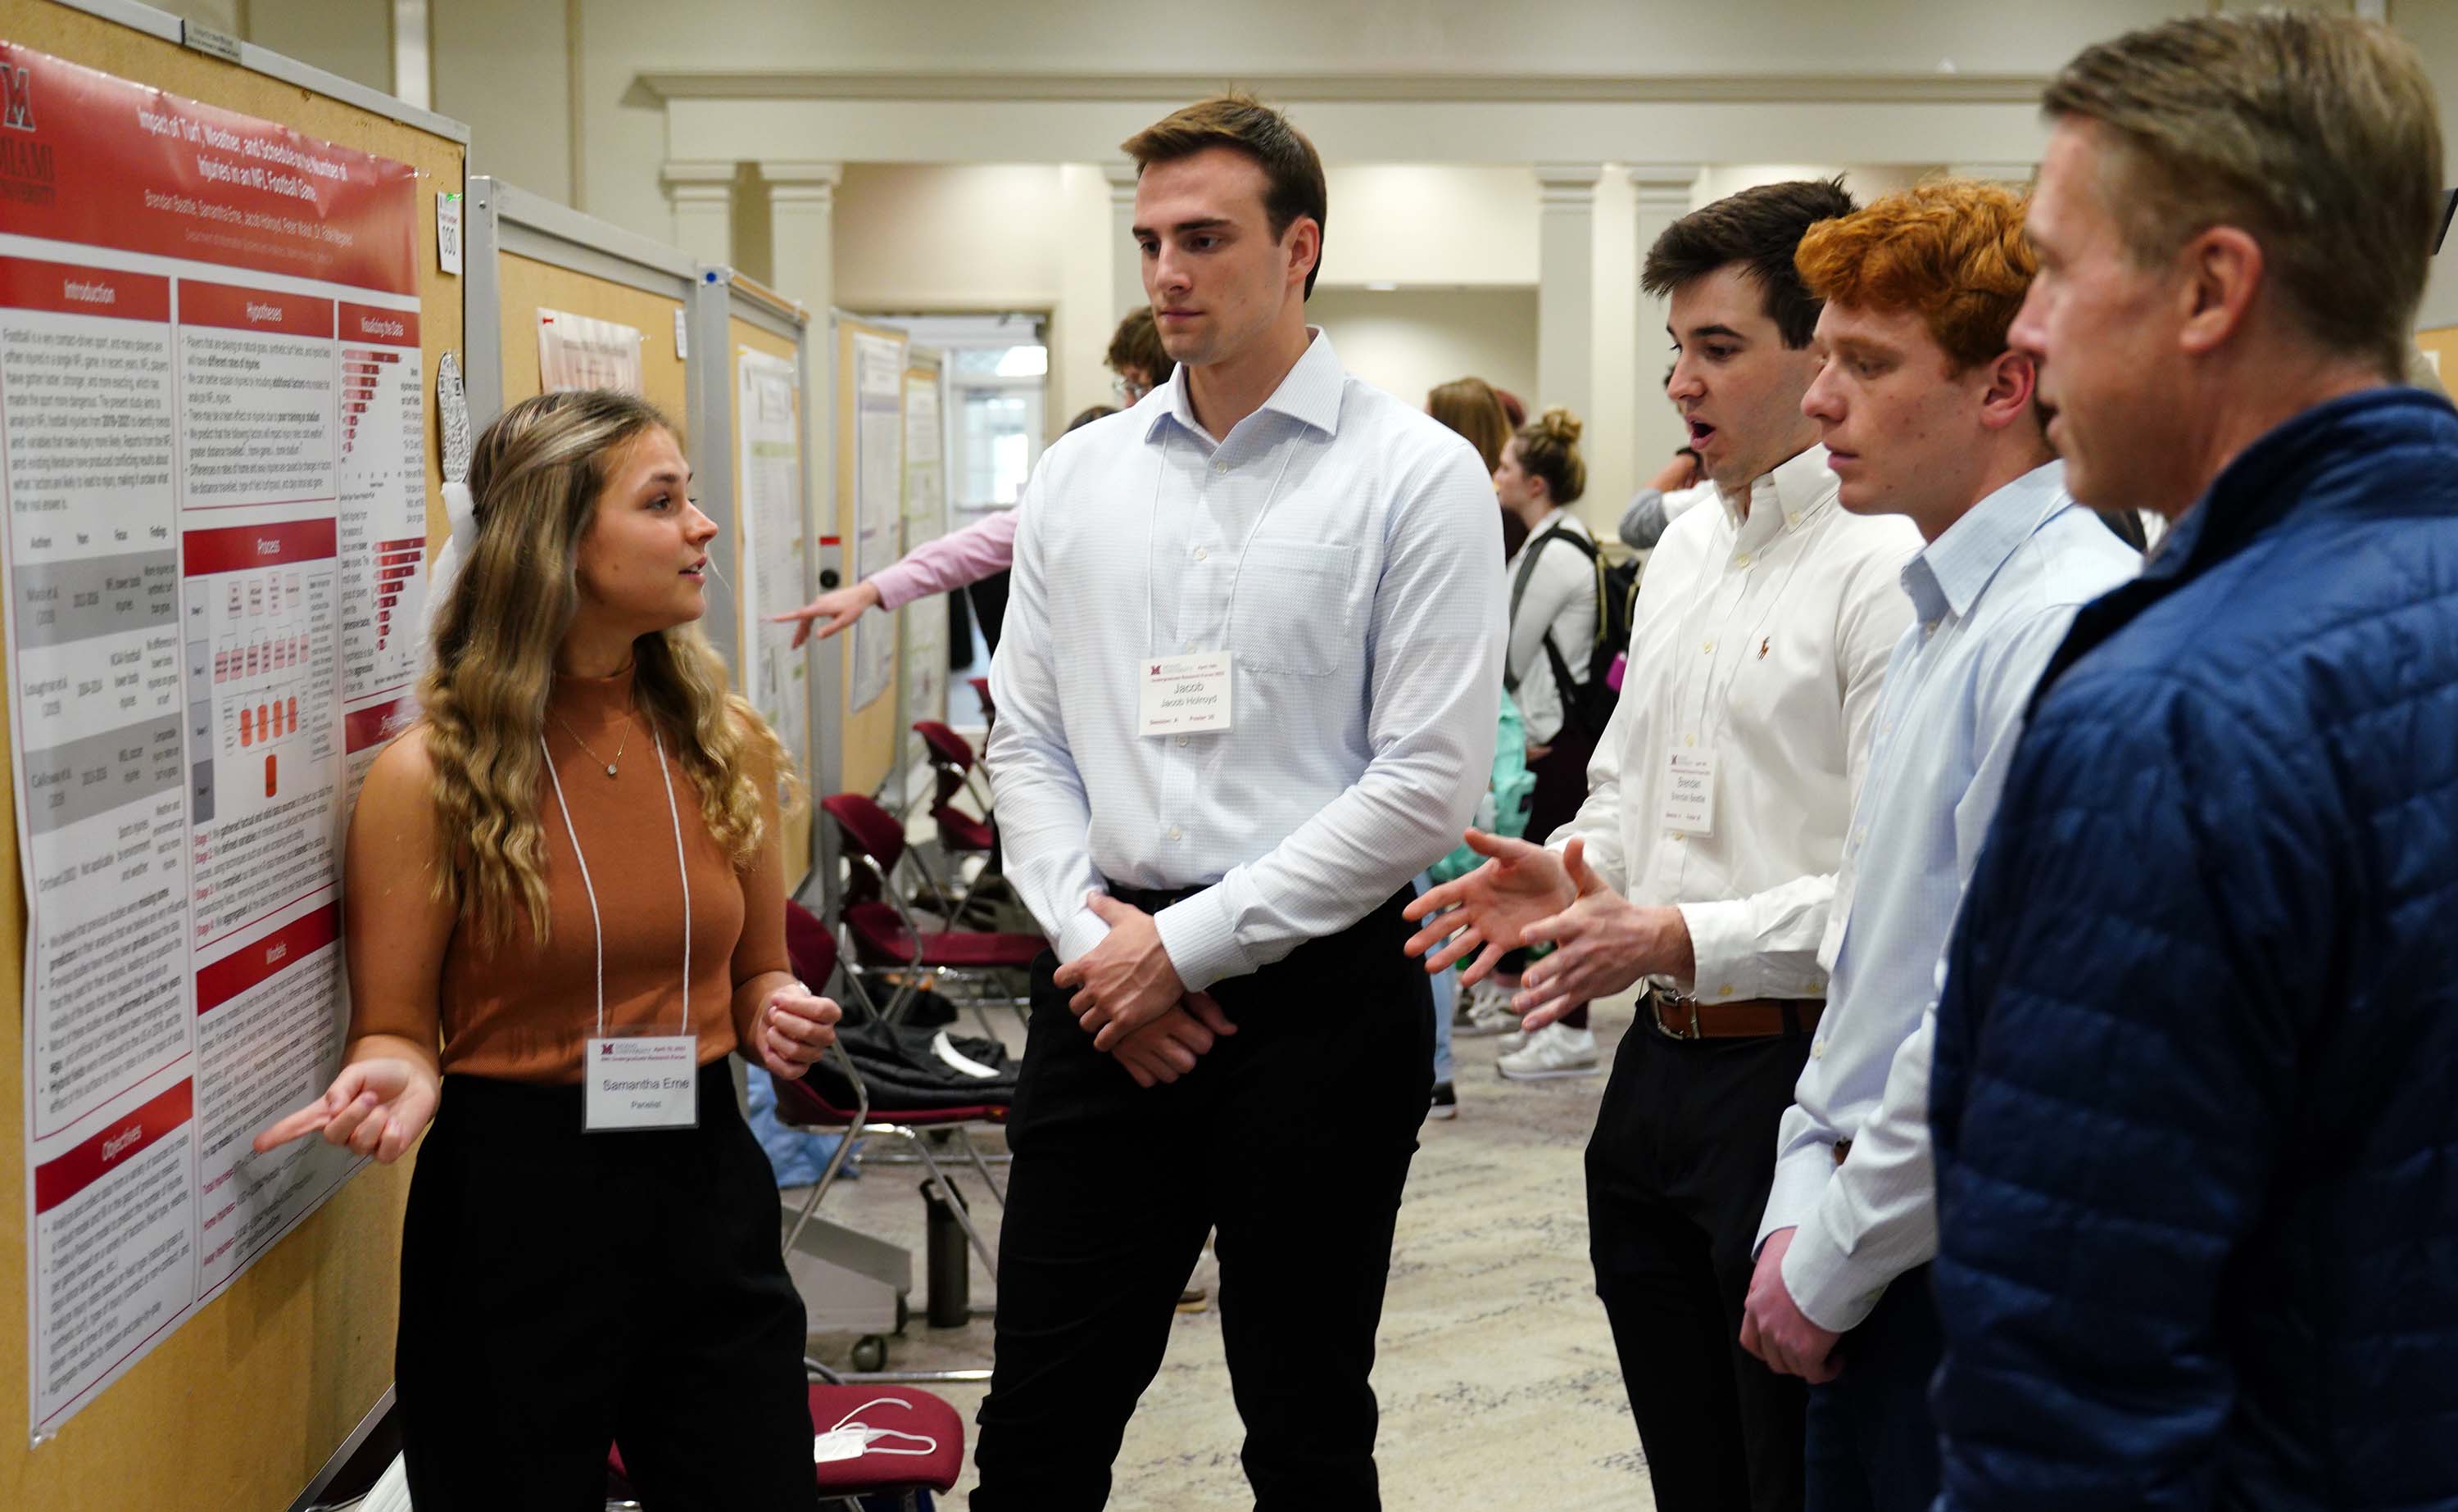 Students talk about research with visitor at forum